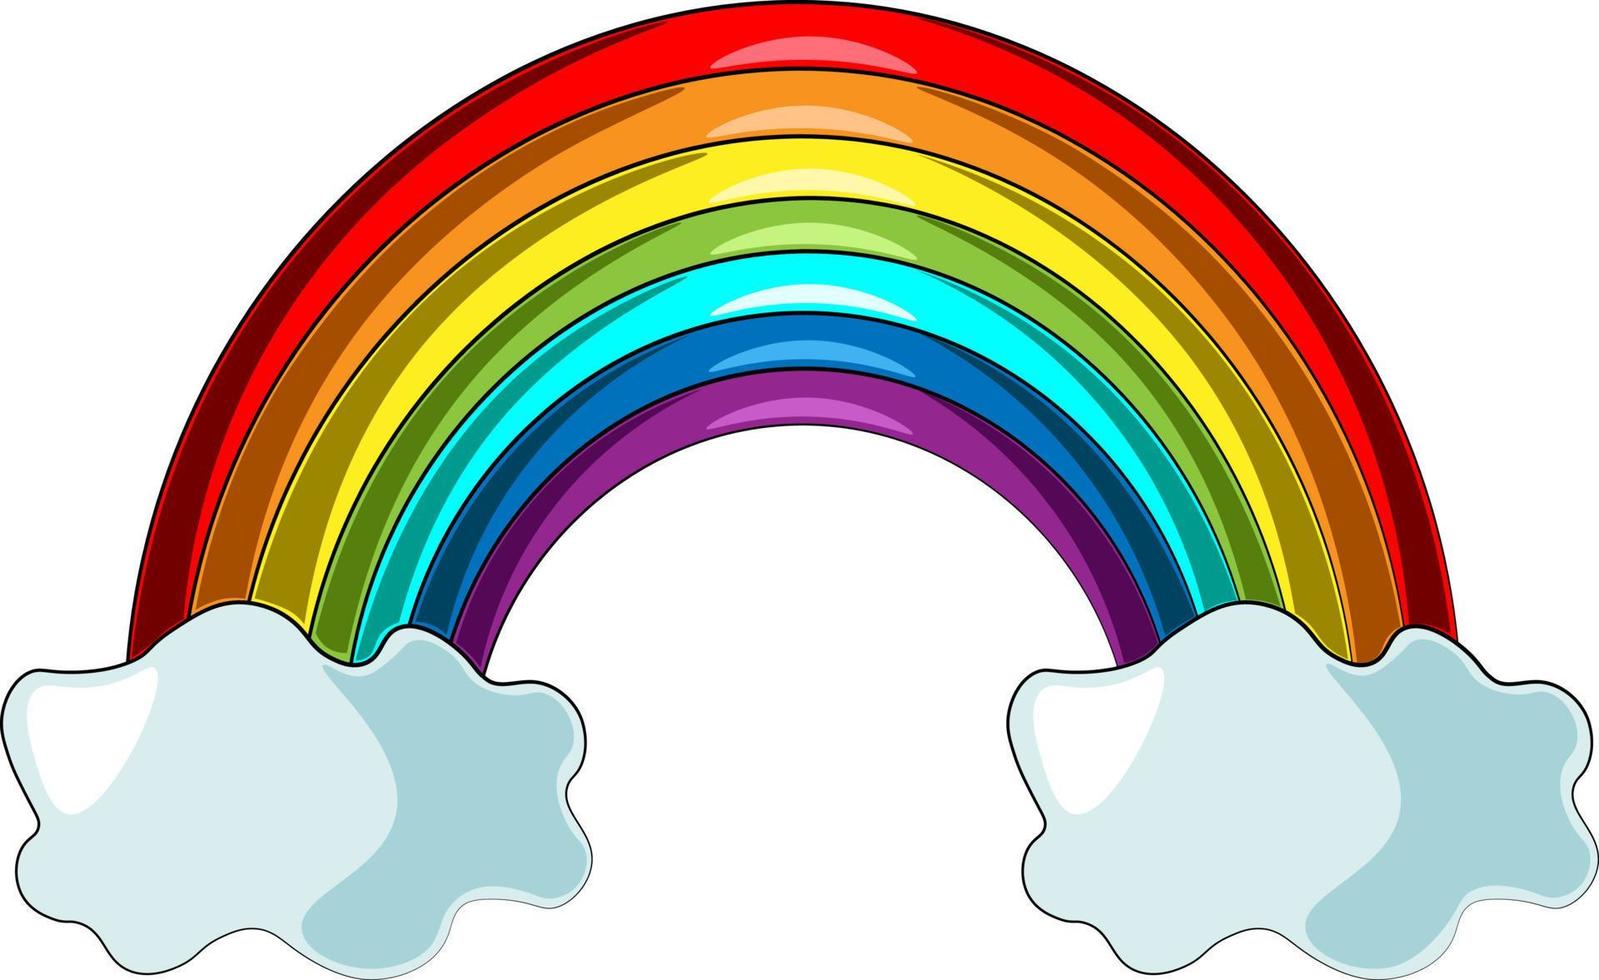 Single element Rainbow. Draw illustration in colors vector